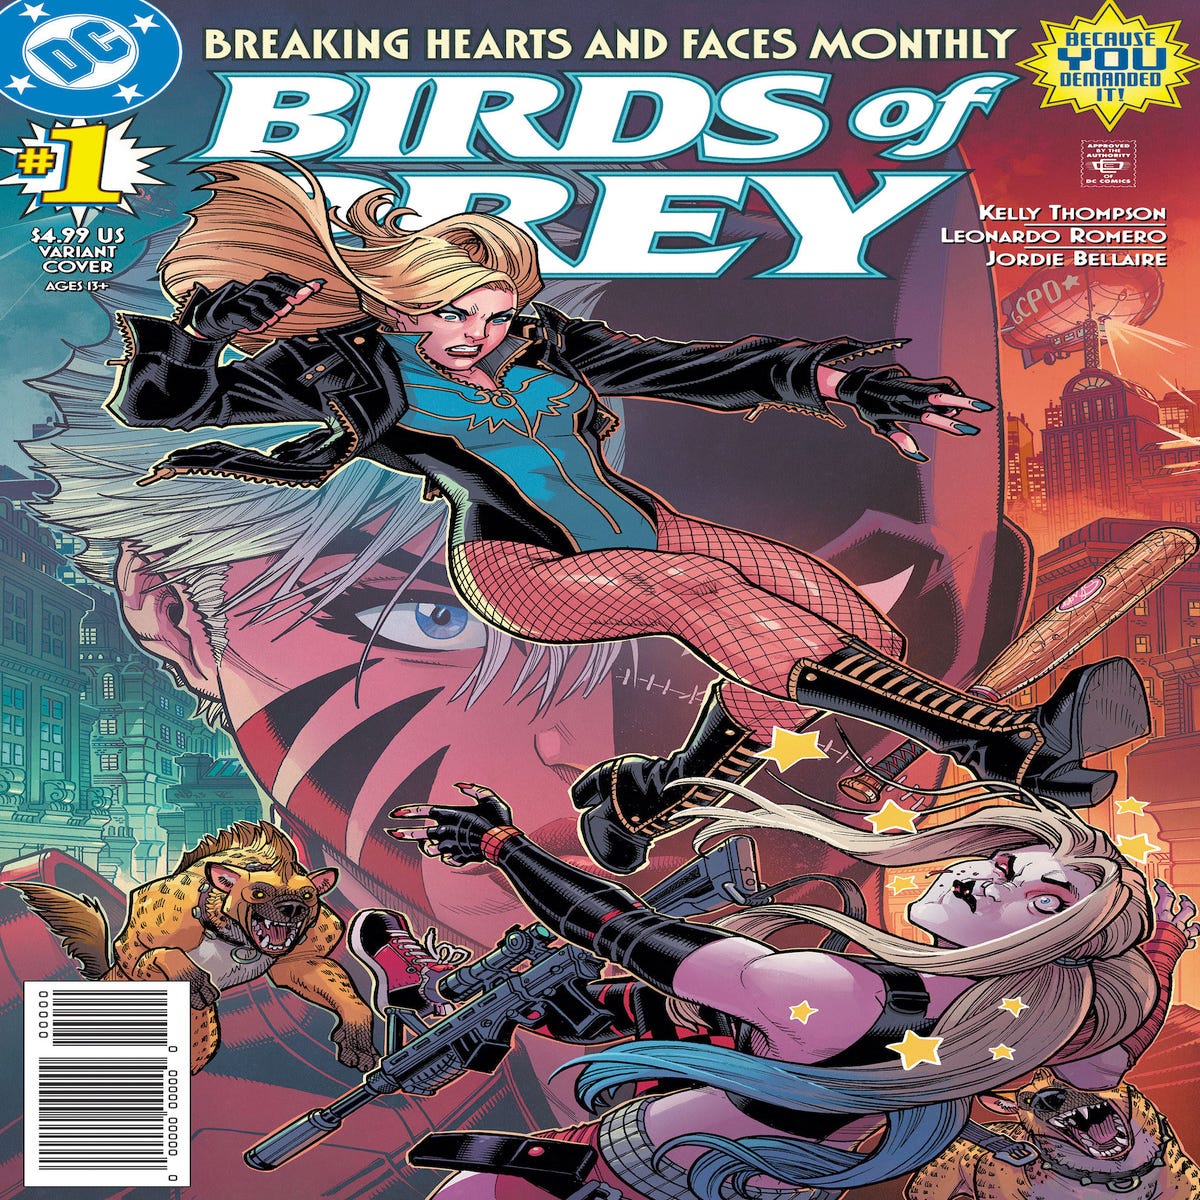 DC Comics Reveals Full Look at the Birds of Prey Cast With Stunning Covers